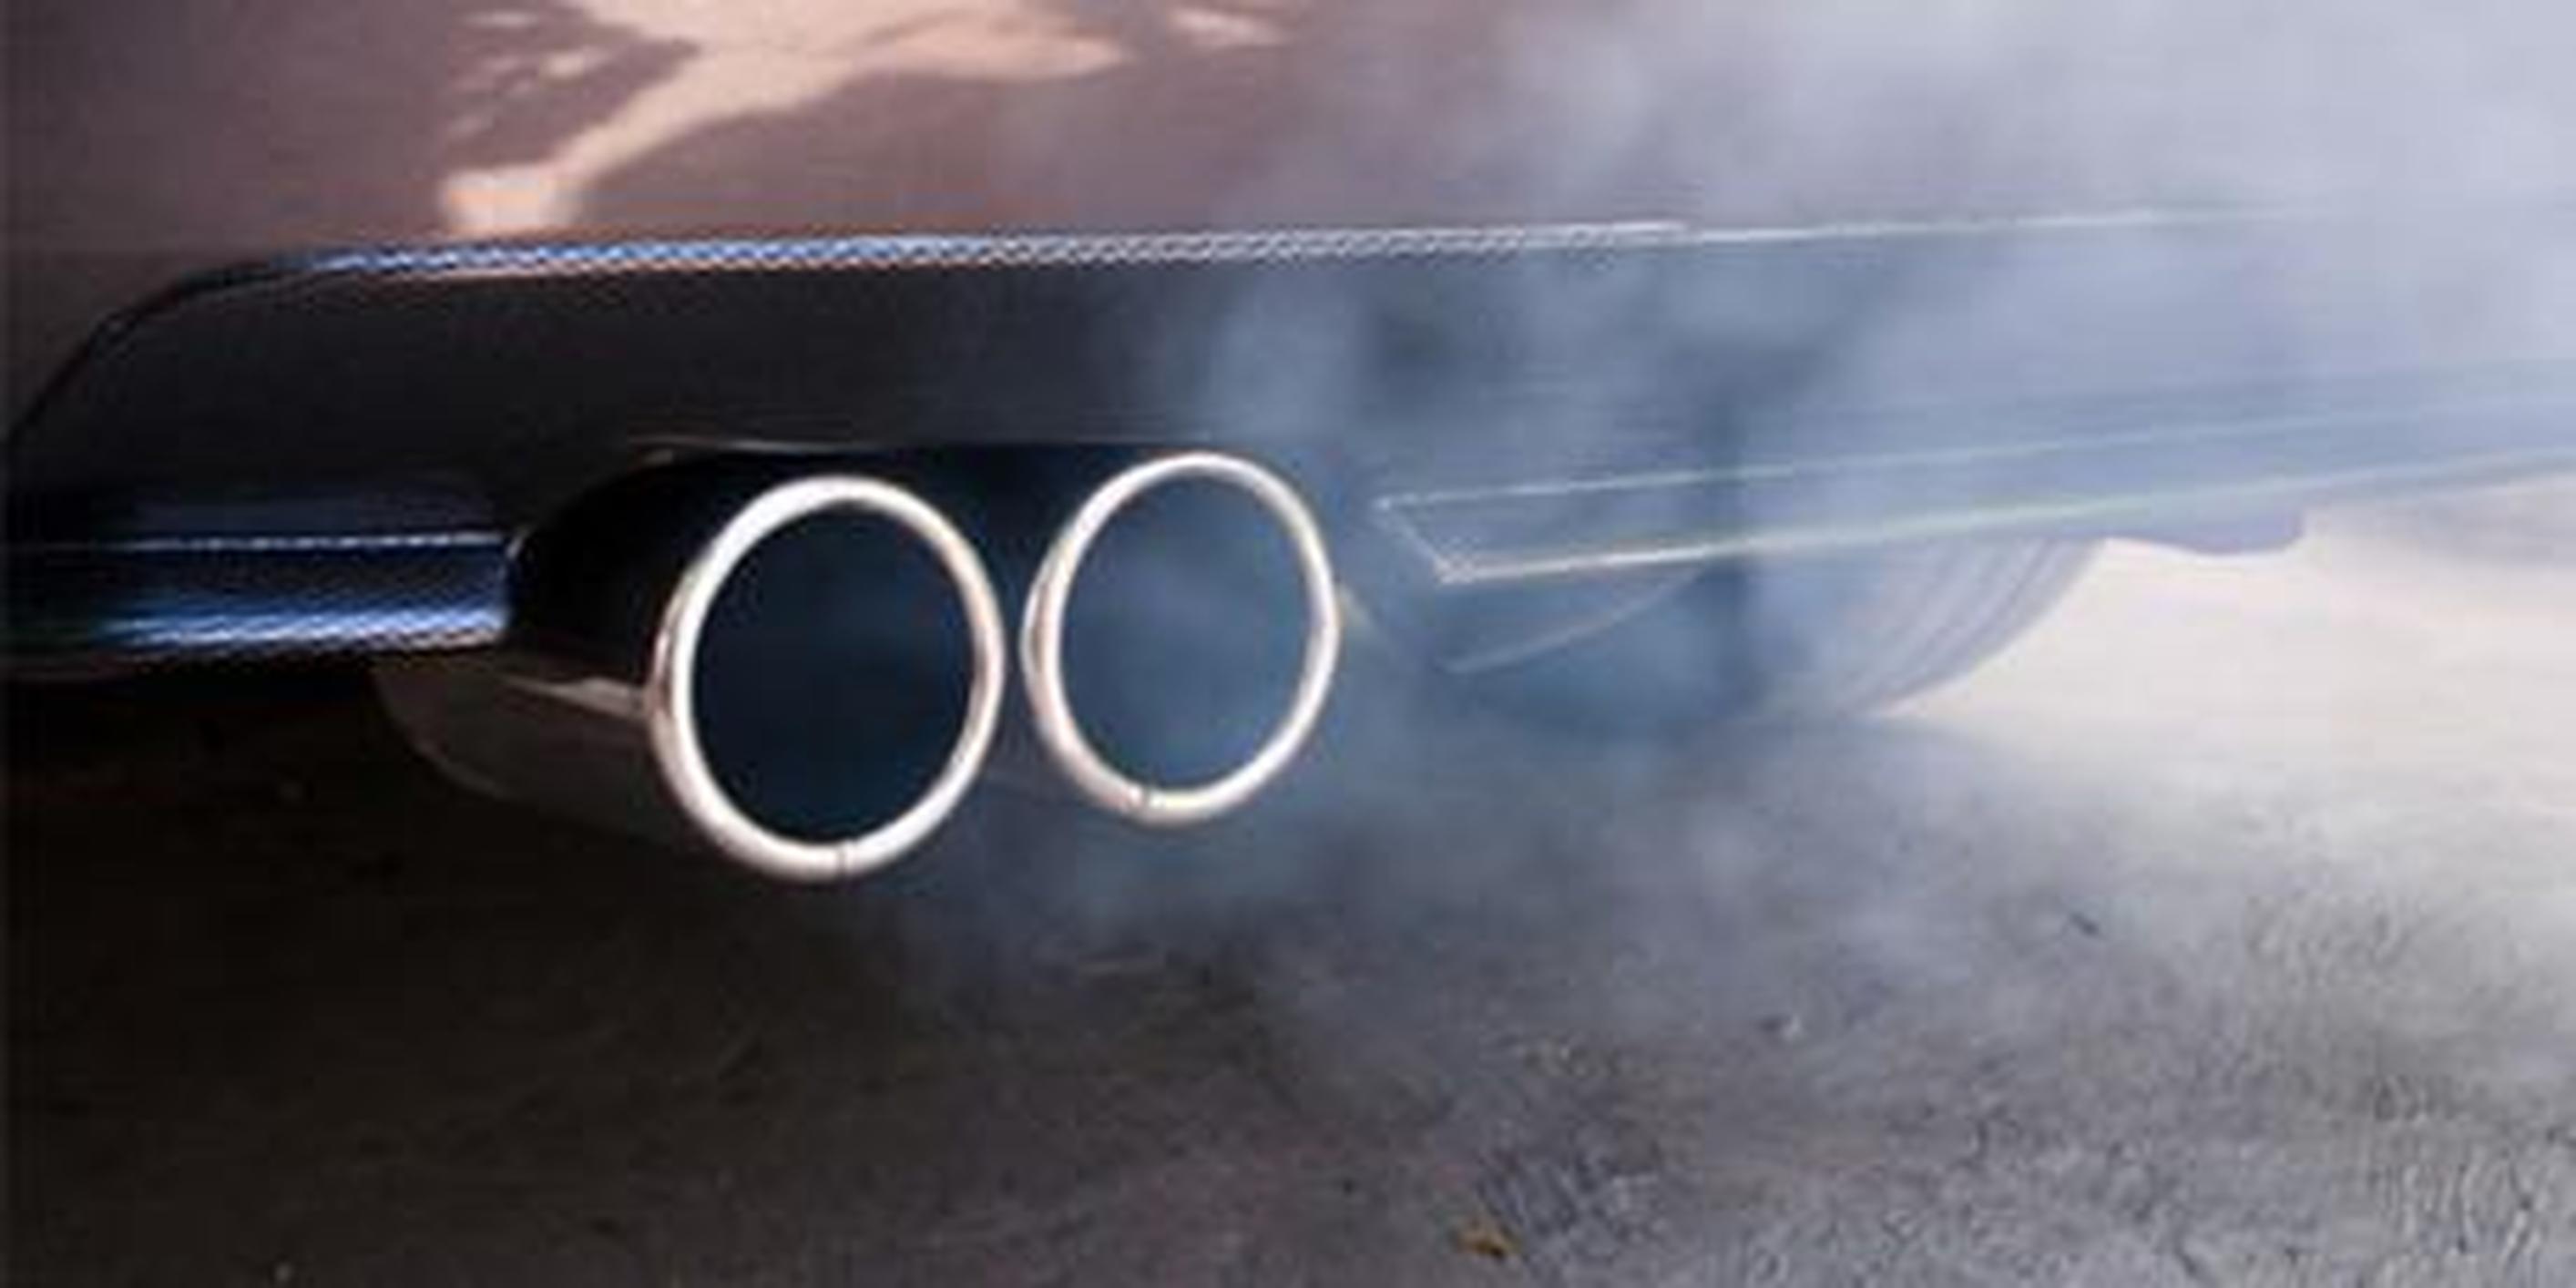 The Environmental Audit Committee raises concerns over government`s reaction to VW emissions cheat device scandal